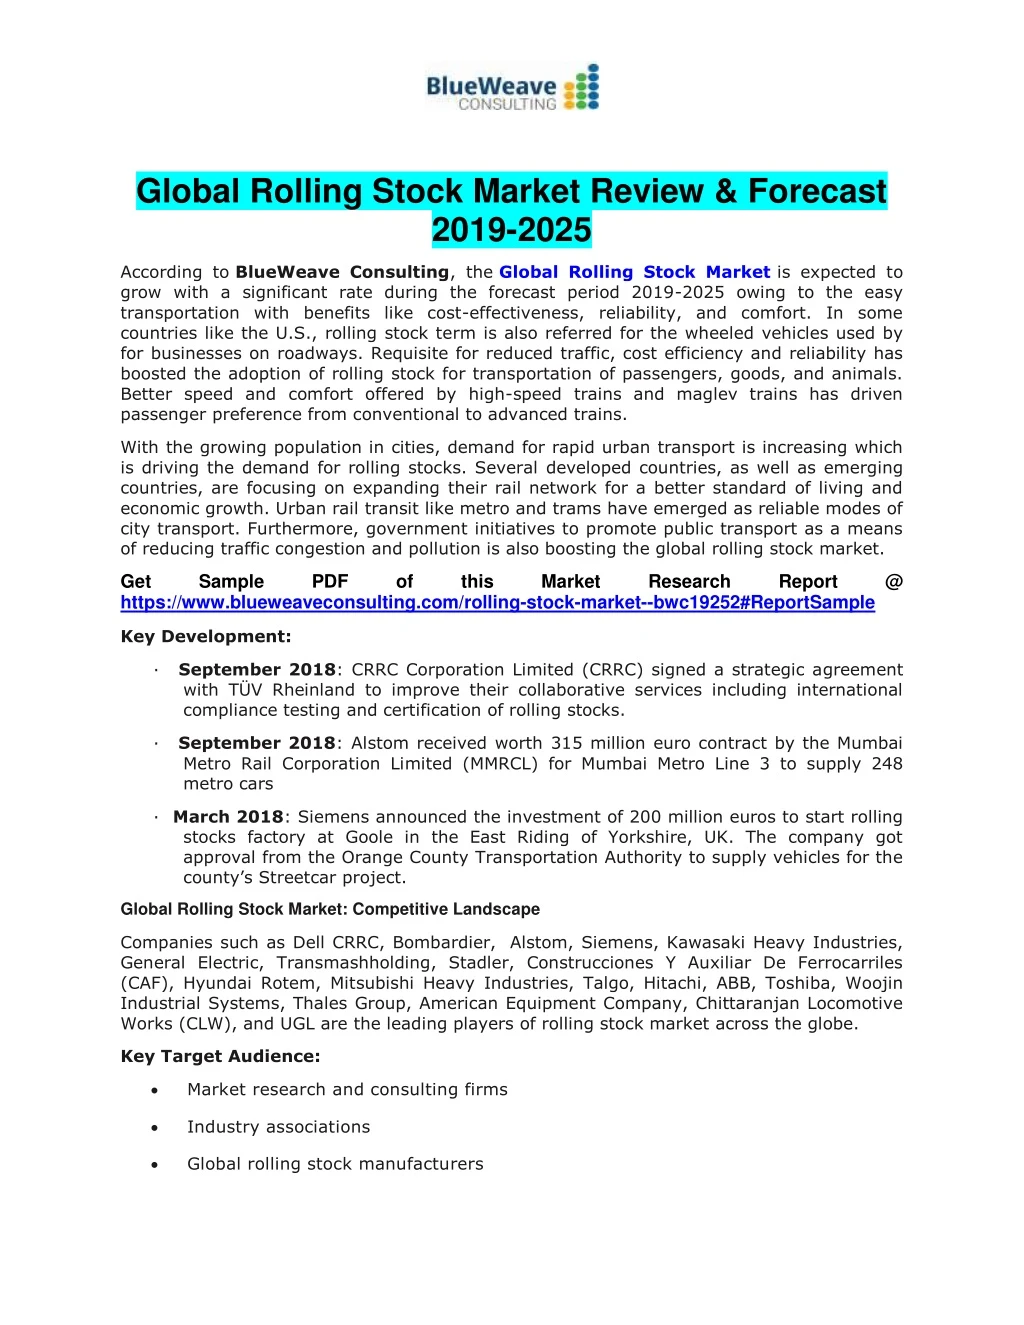 global rolling stock market review forecast 2019